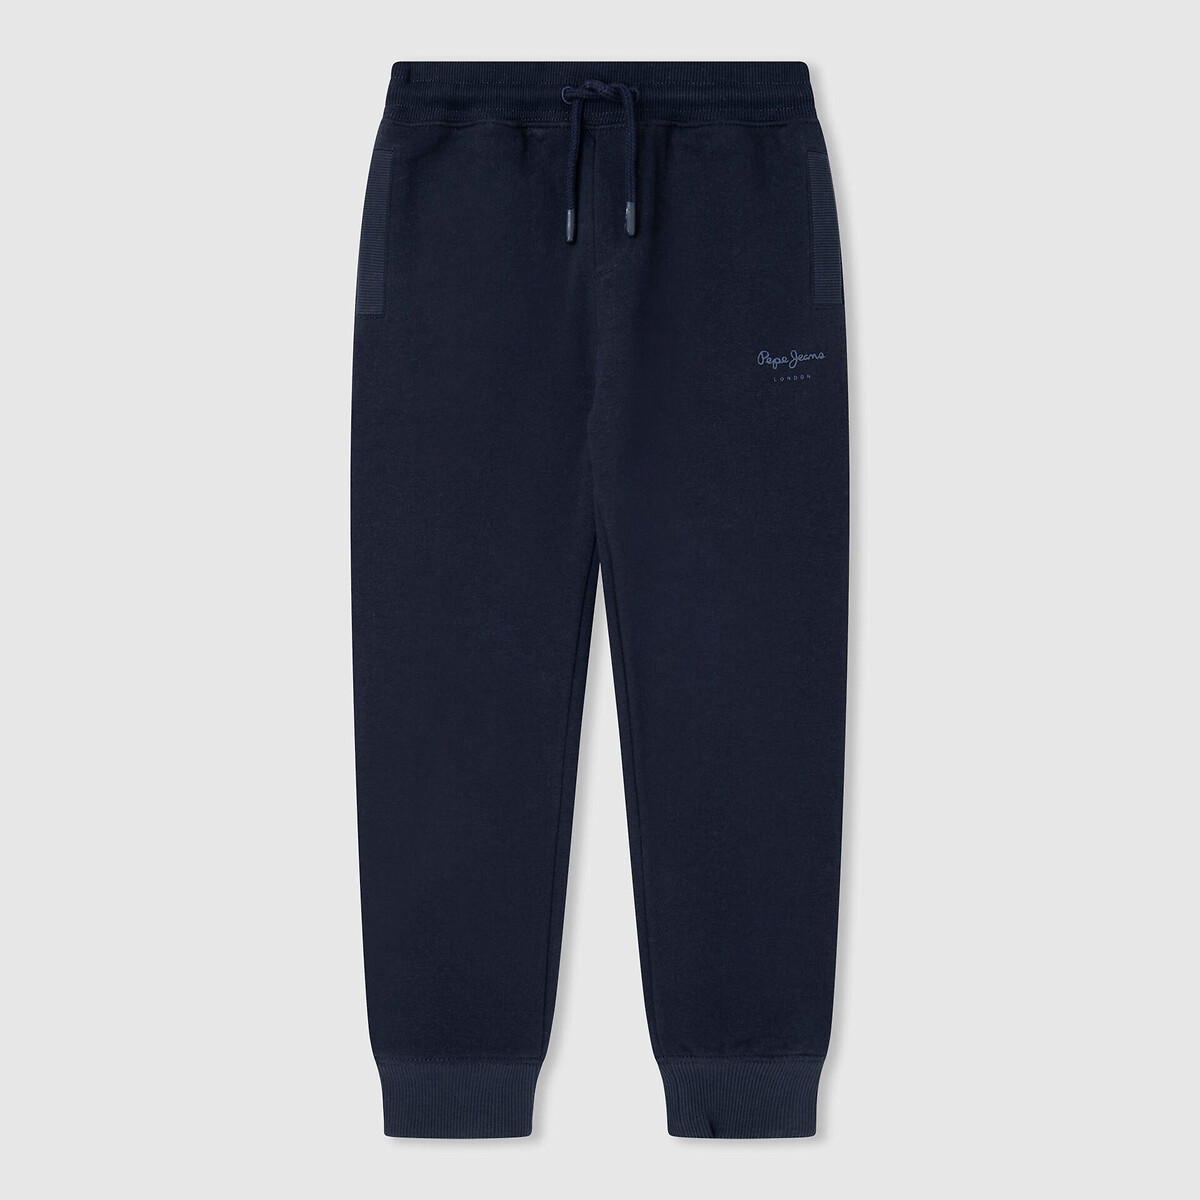 Image of Cotton Joggers